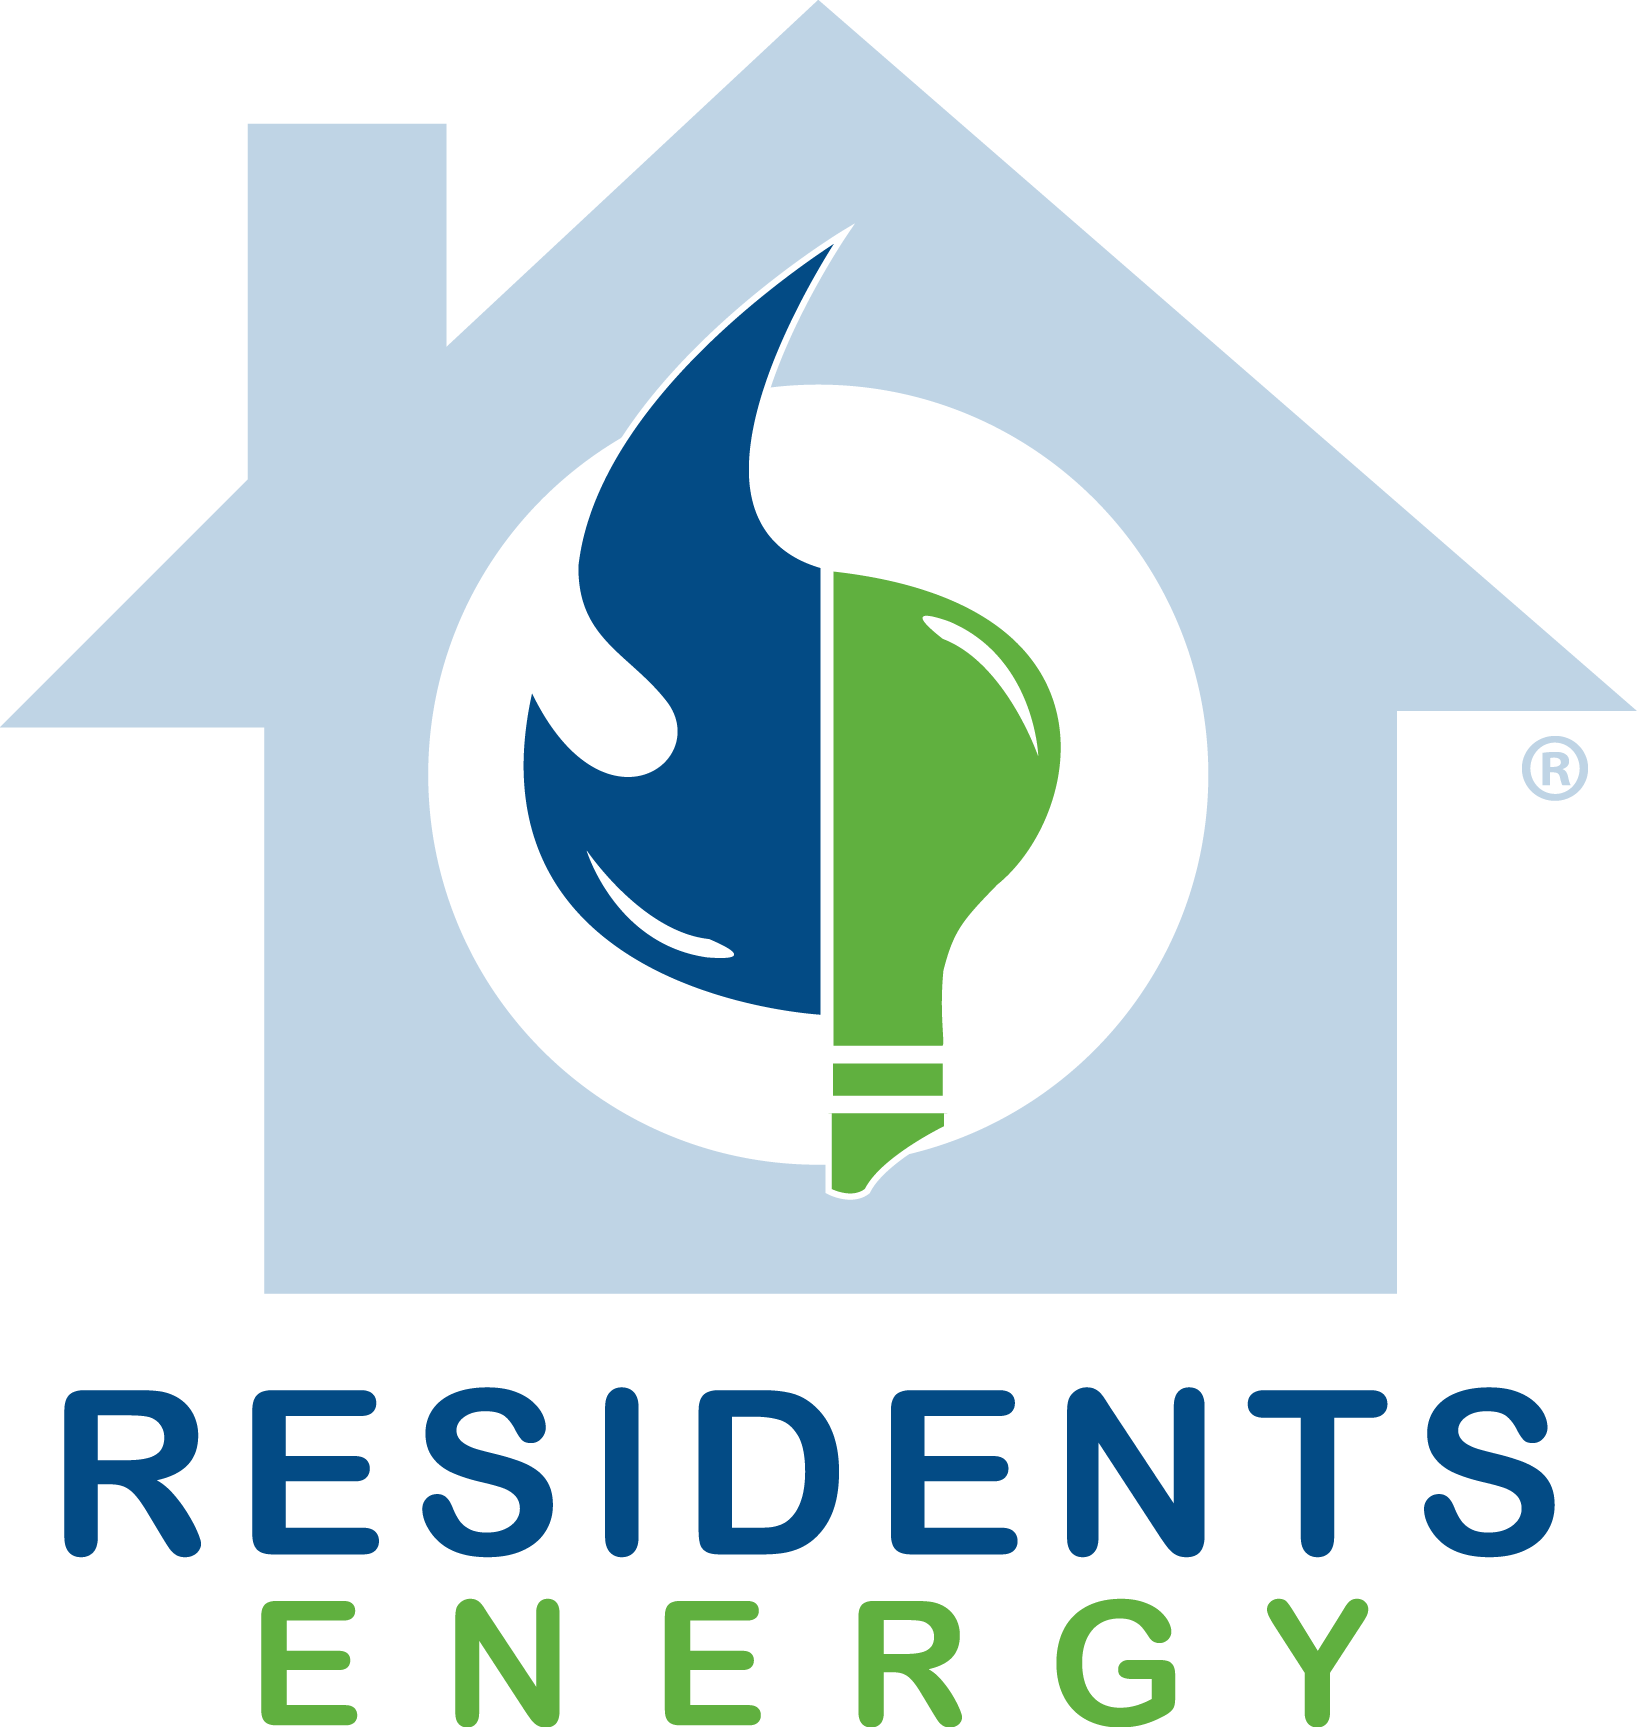 Click to see details for Residents Energy, LLC offer. Price 0.31600